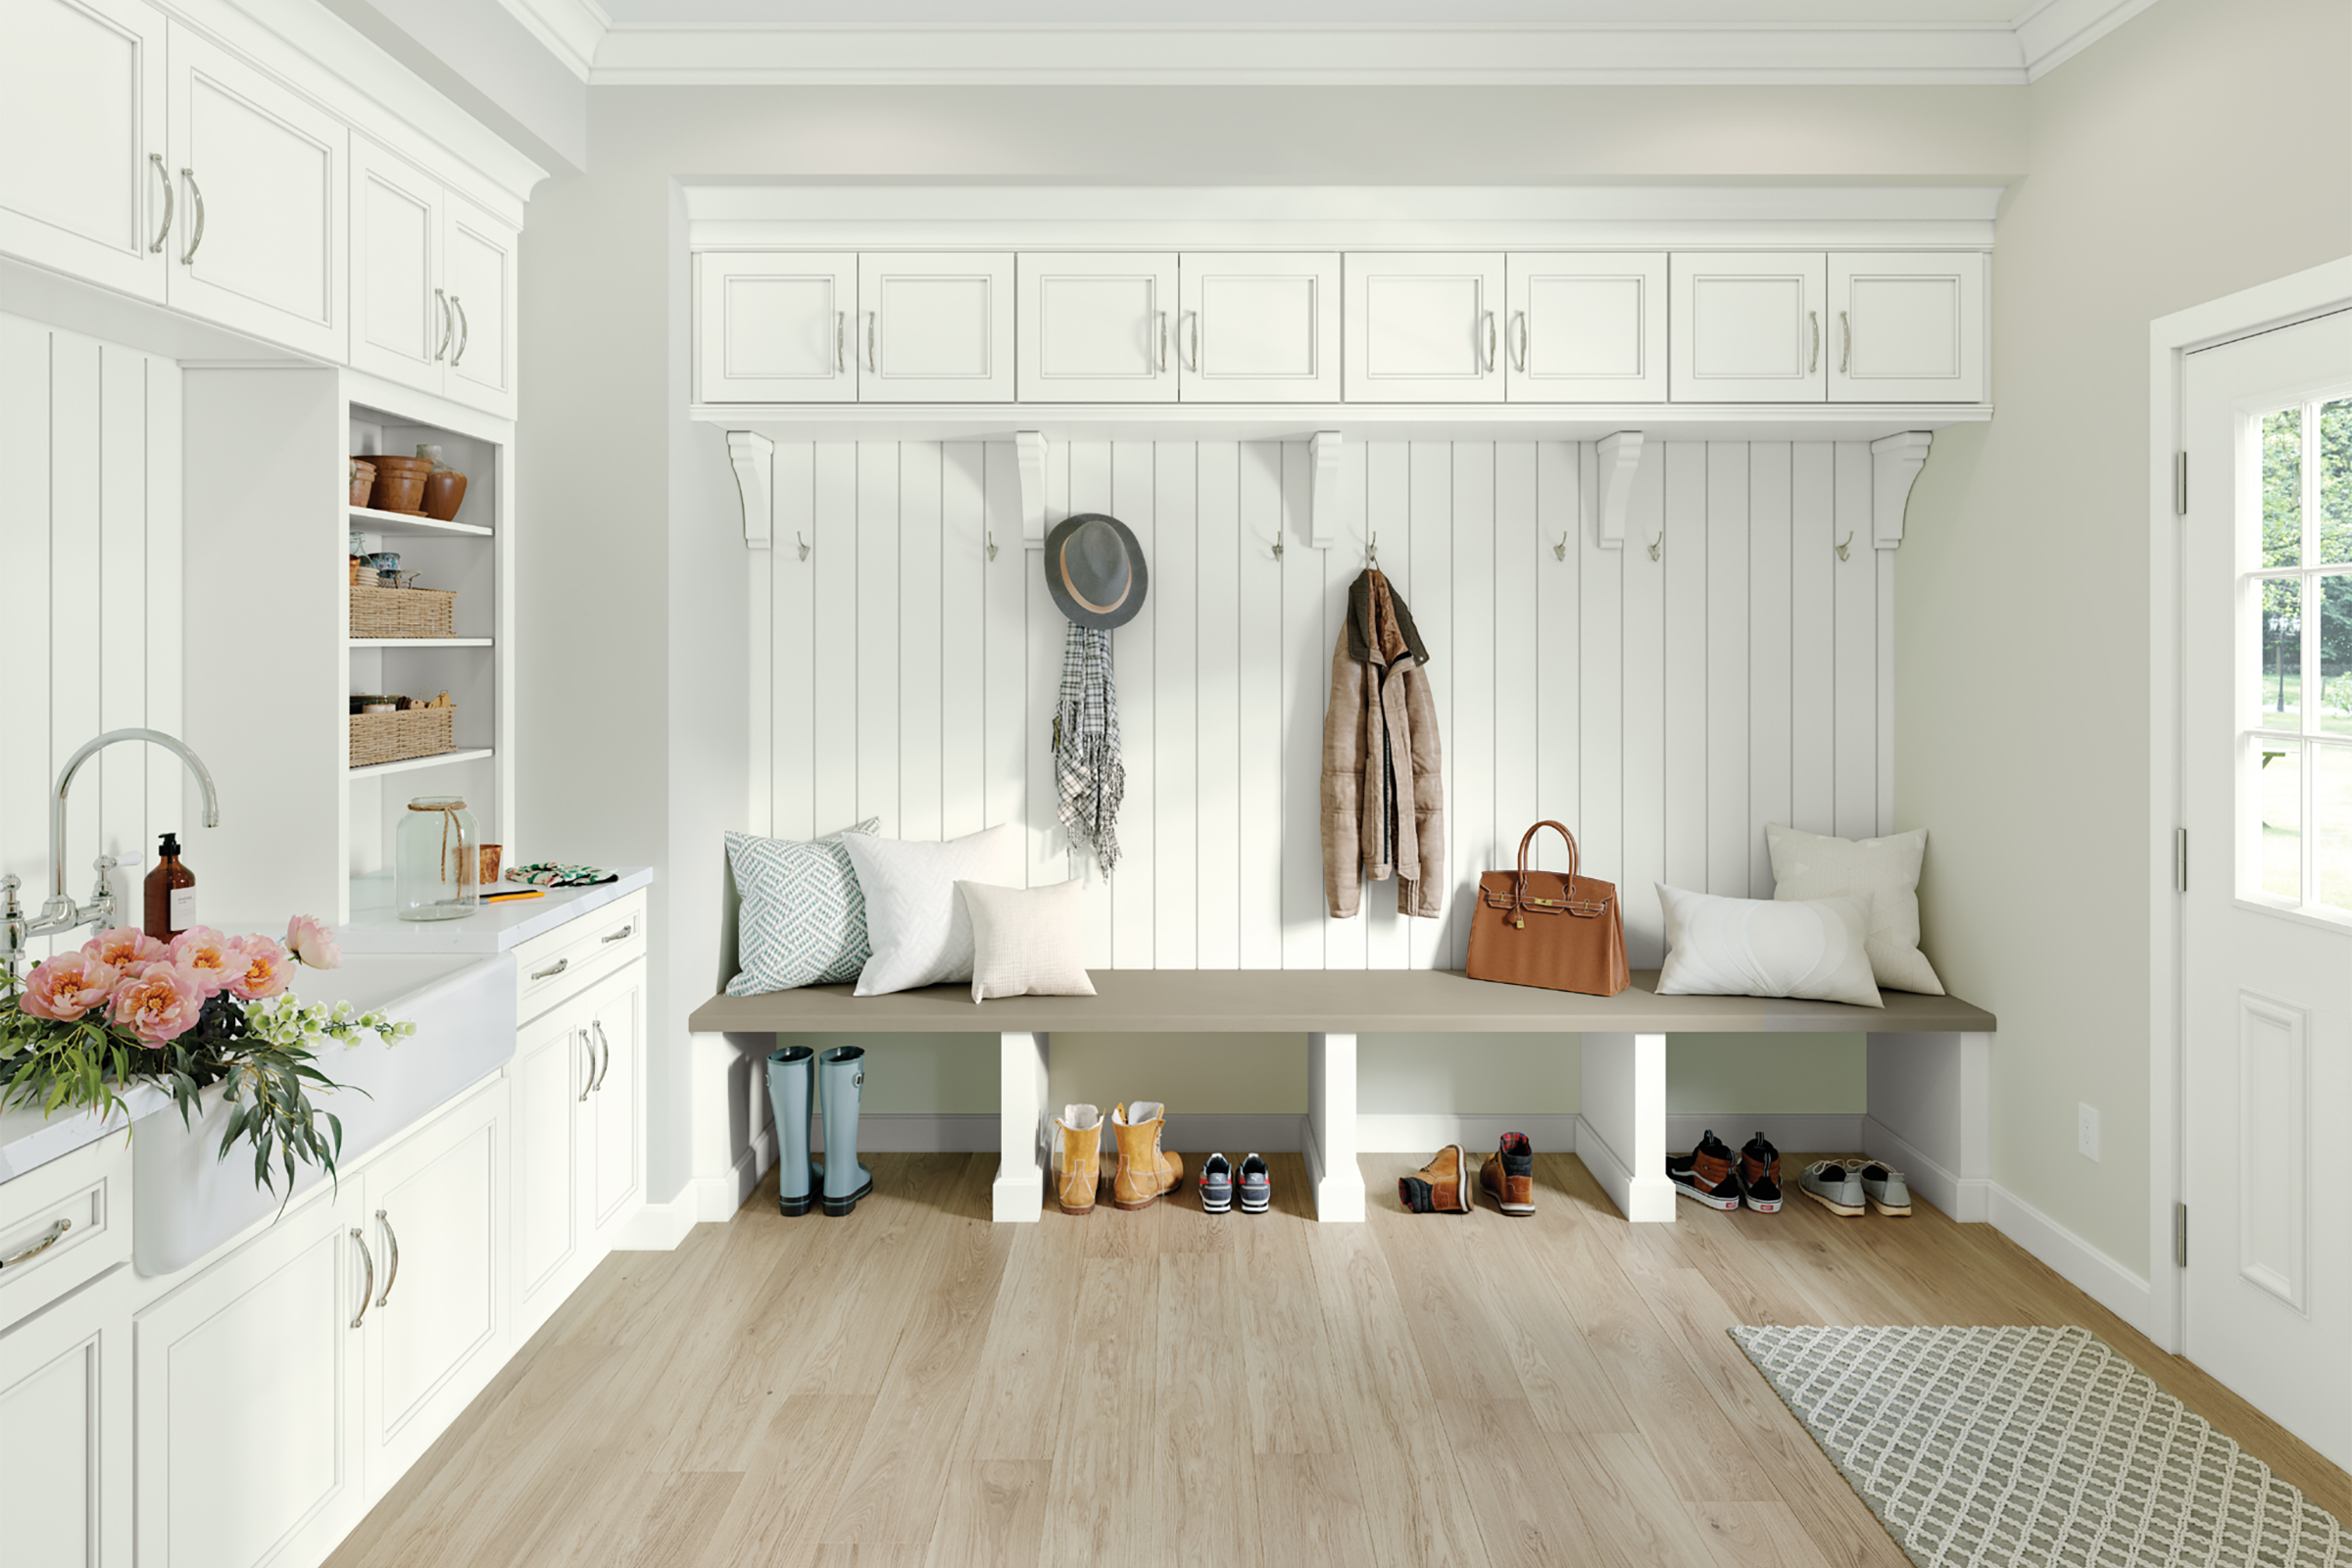 KraftMaid white mudroom cabinets with utility sink